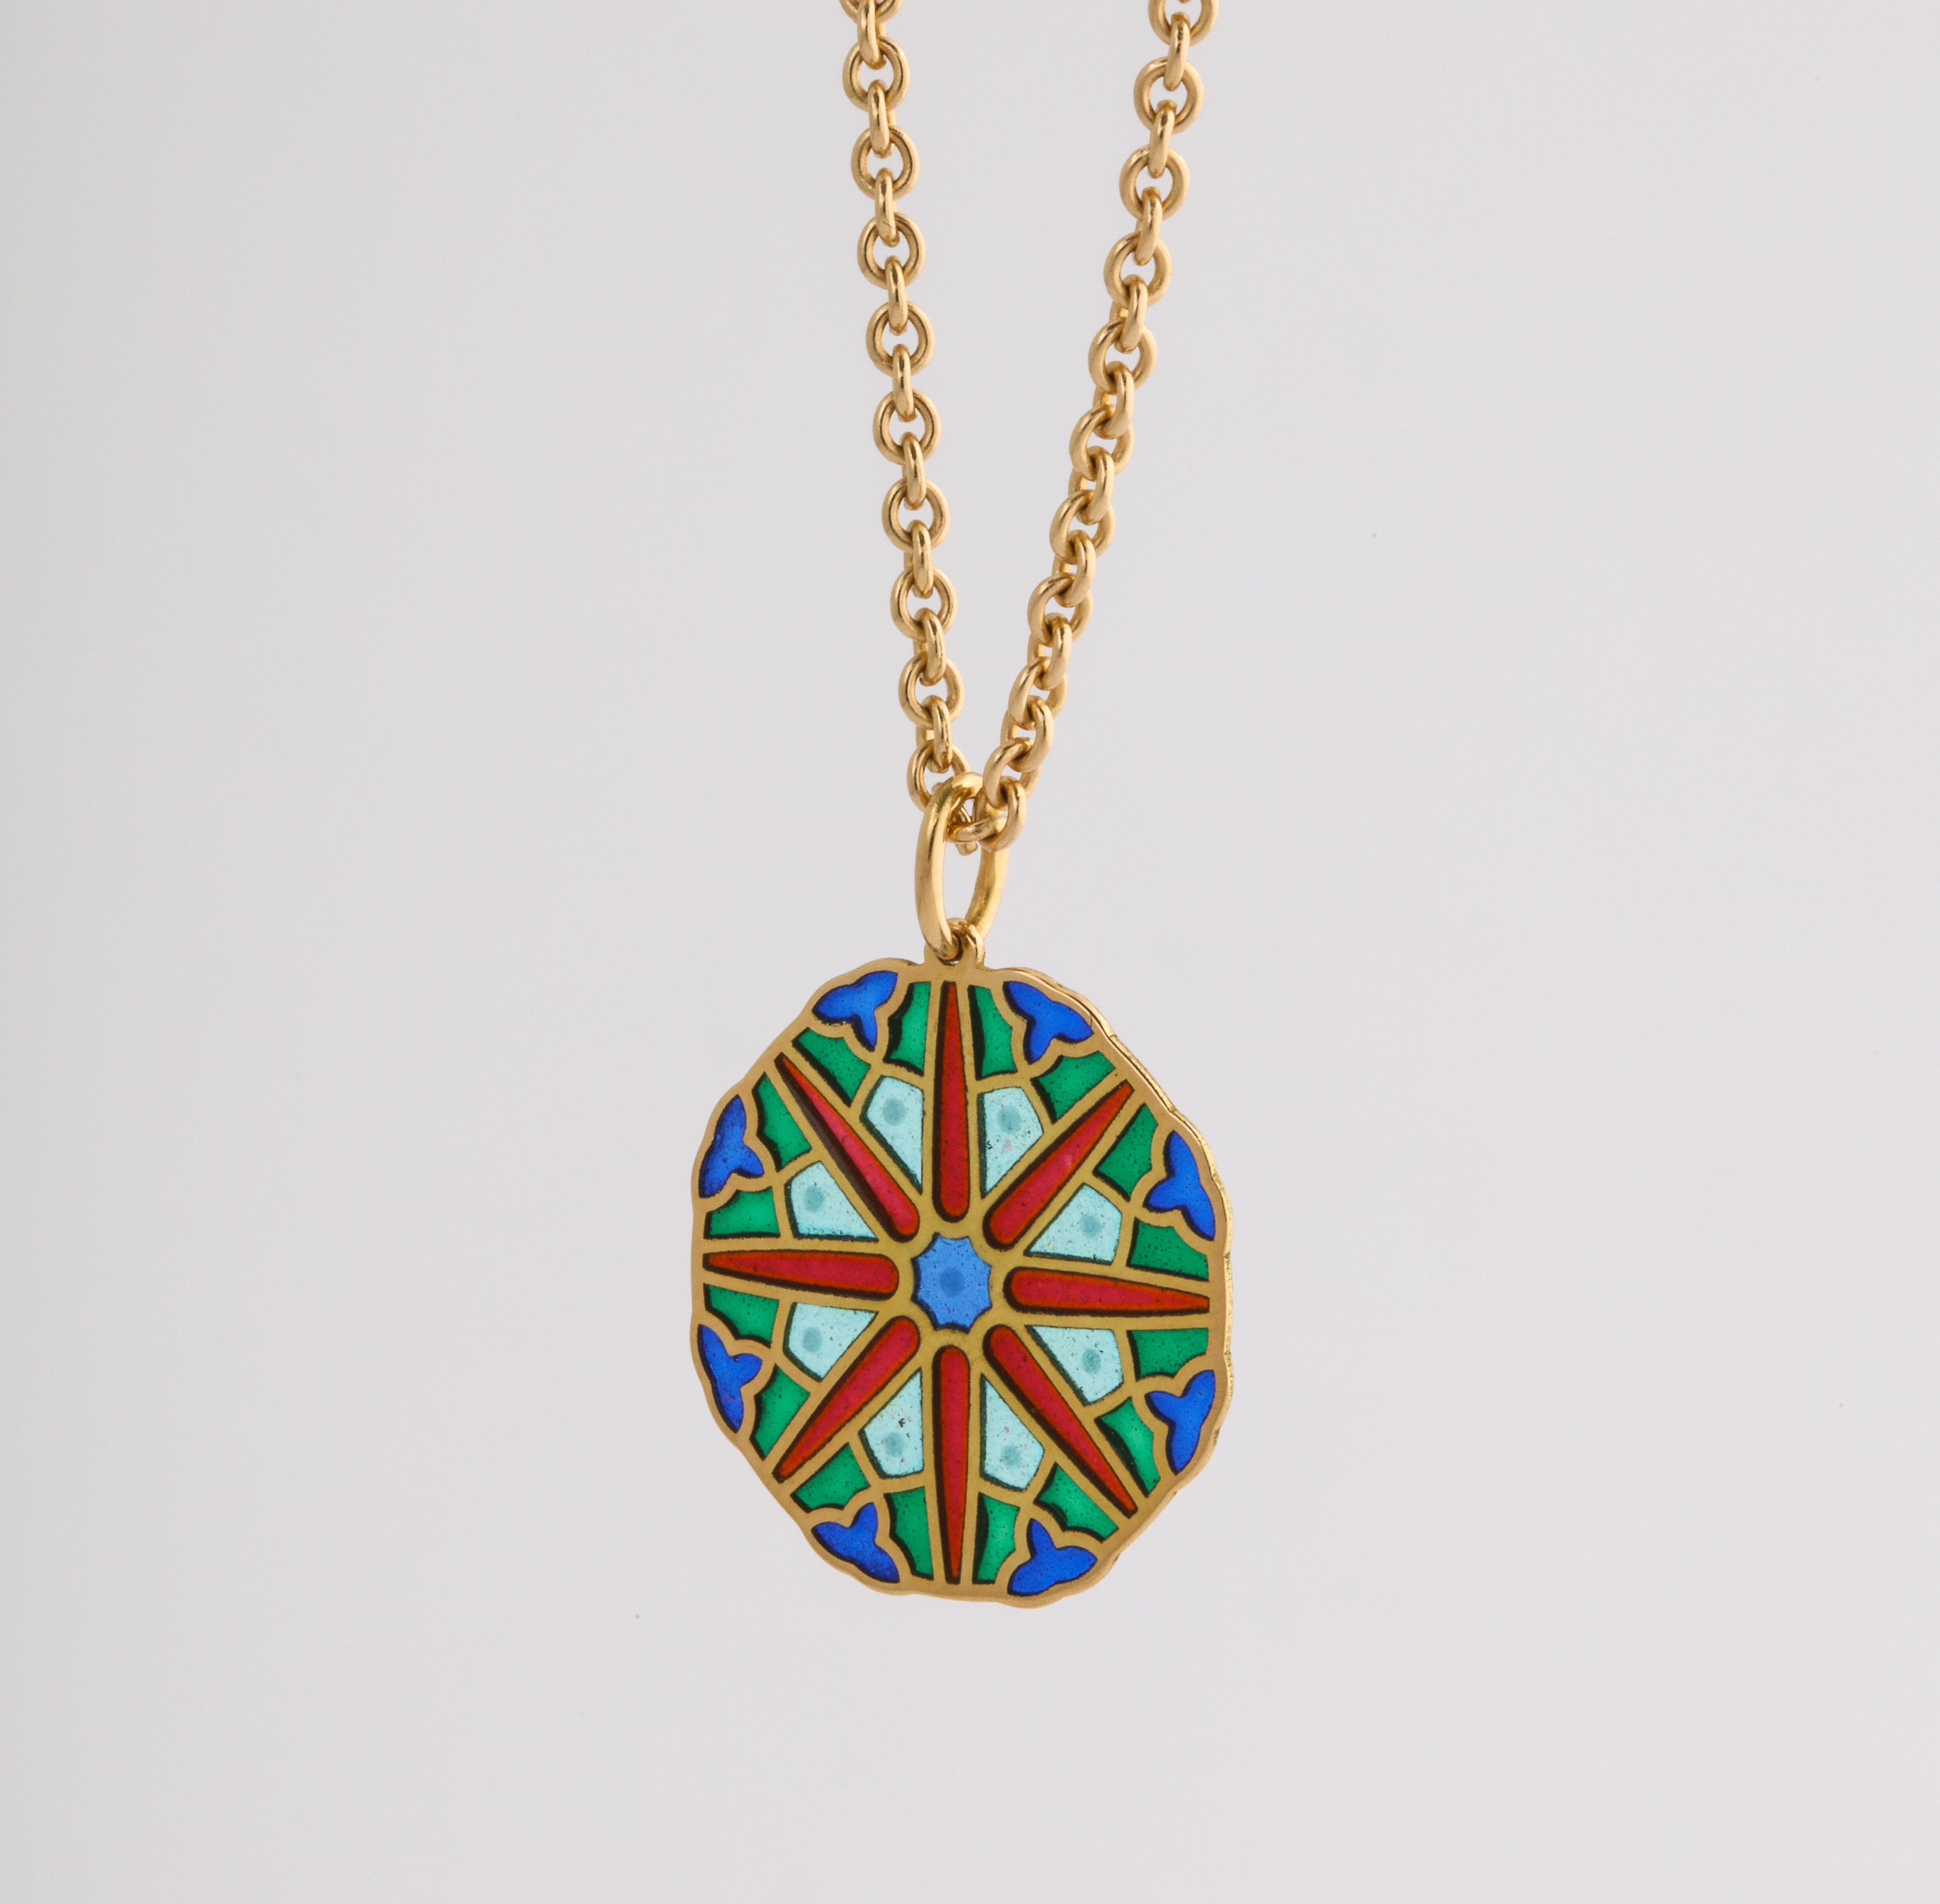 Recalling the Gothic stain glass windows of the French Cathedral in the city of Orléans, this 18k gold pendant is decorated with vibrant plique-a-jour (transparent) enamel colors, separated by gold cloisons, a unique pendant designed and created